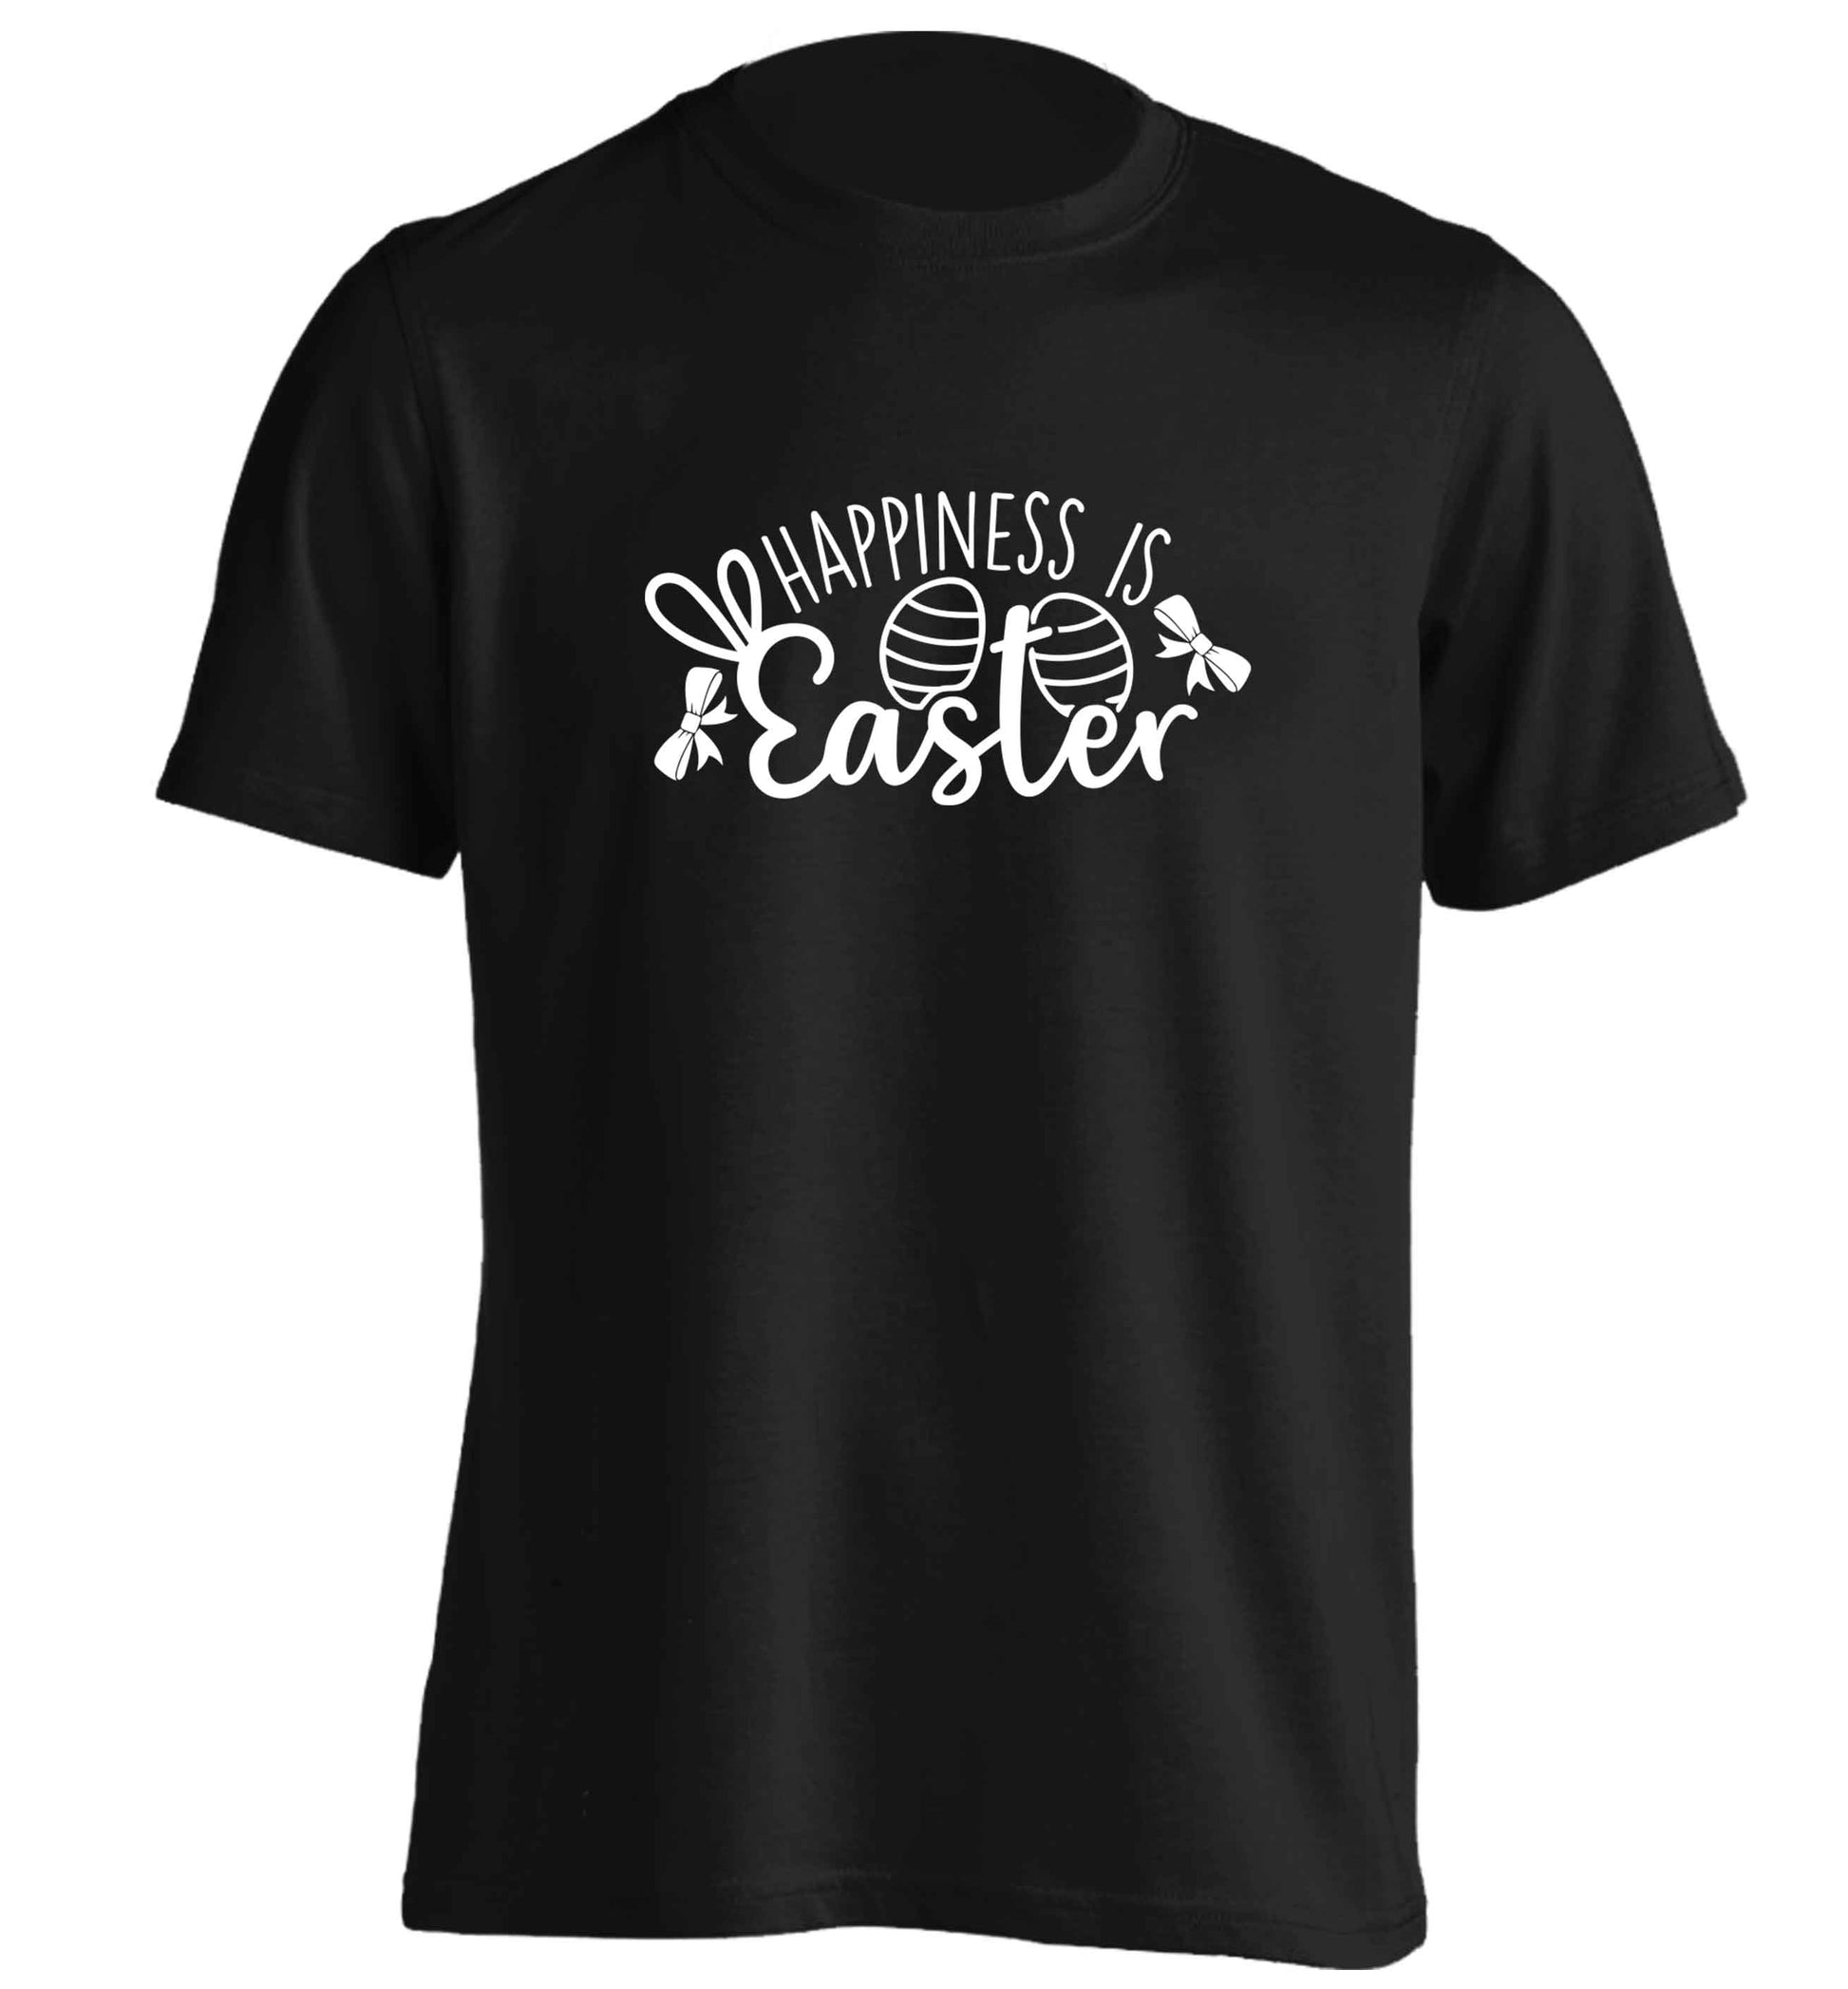 Happiness is easter adults unisex black Tshirt 2XL